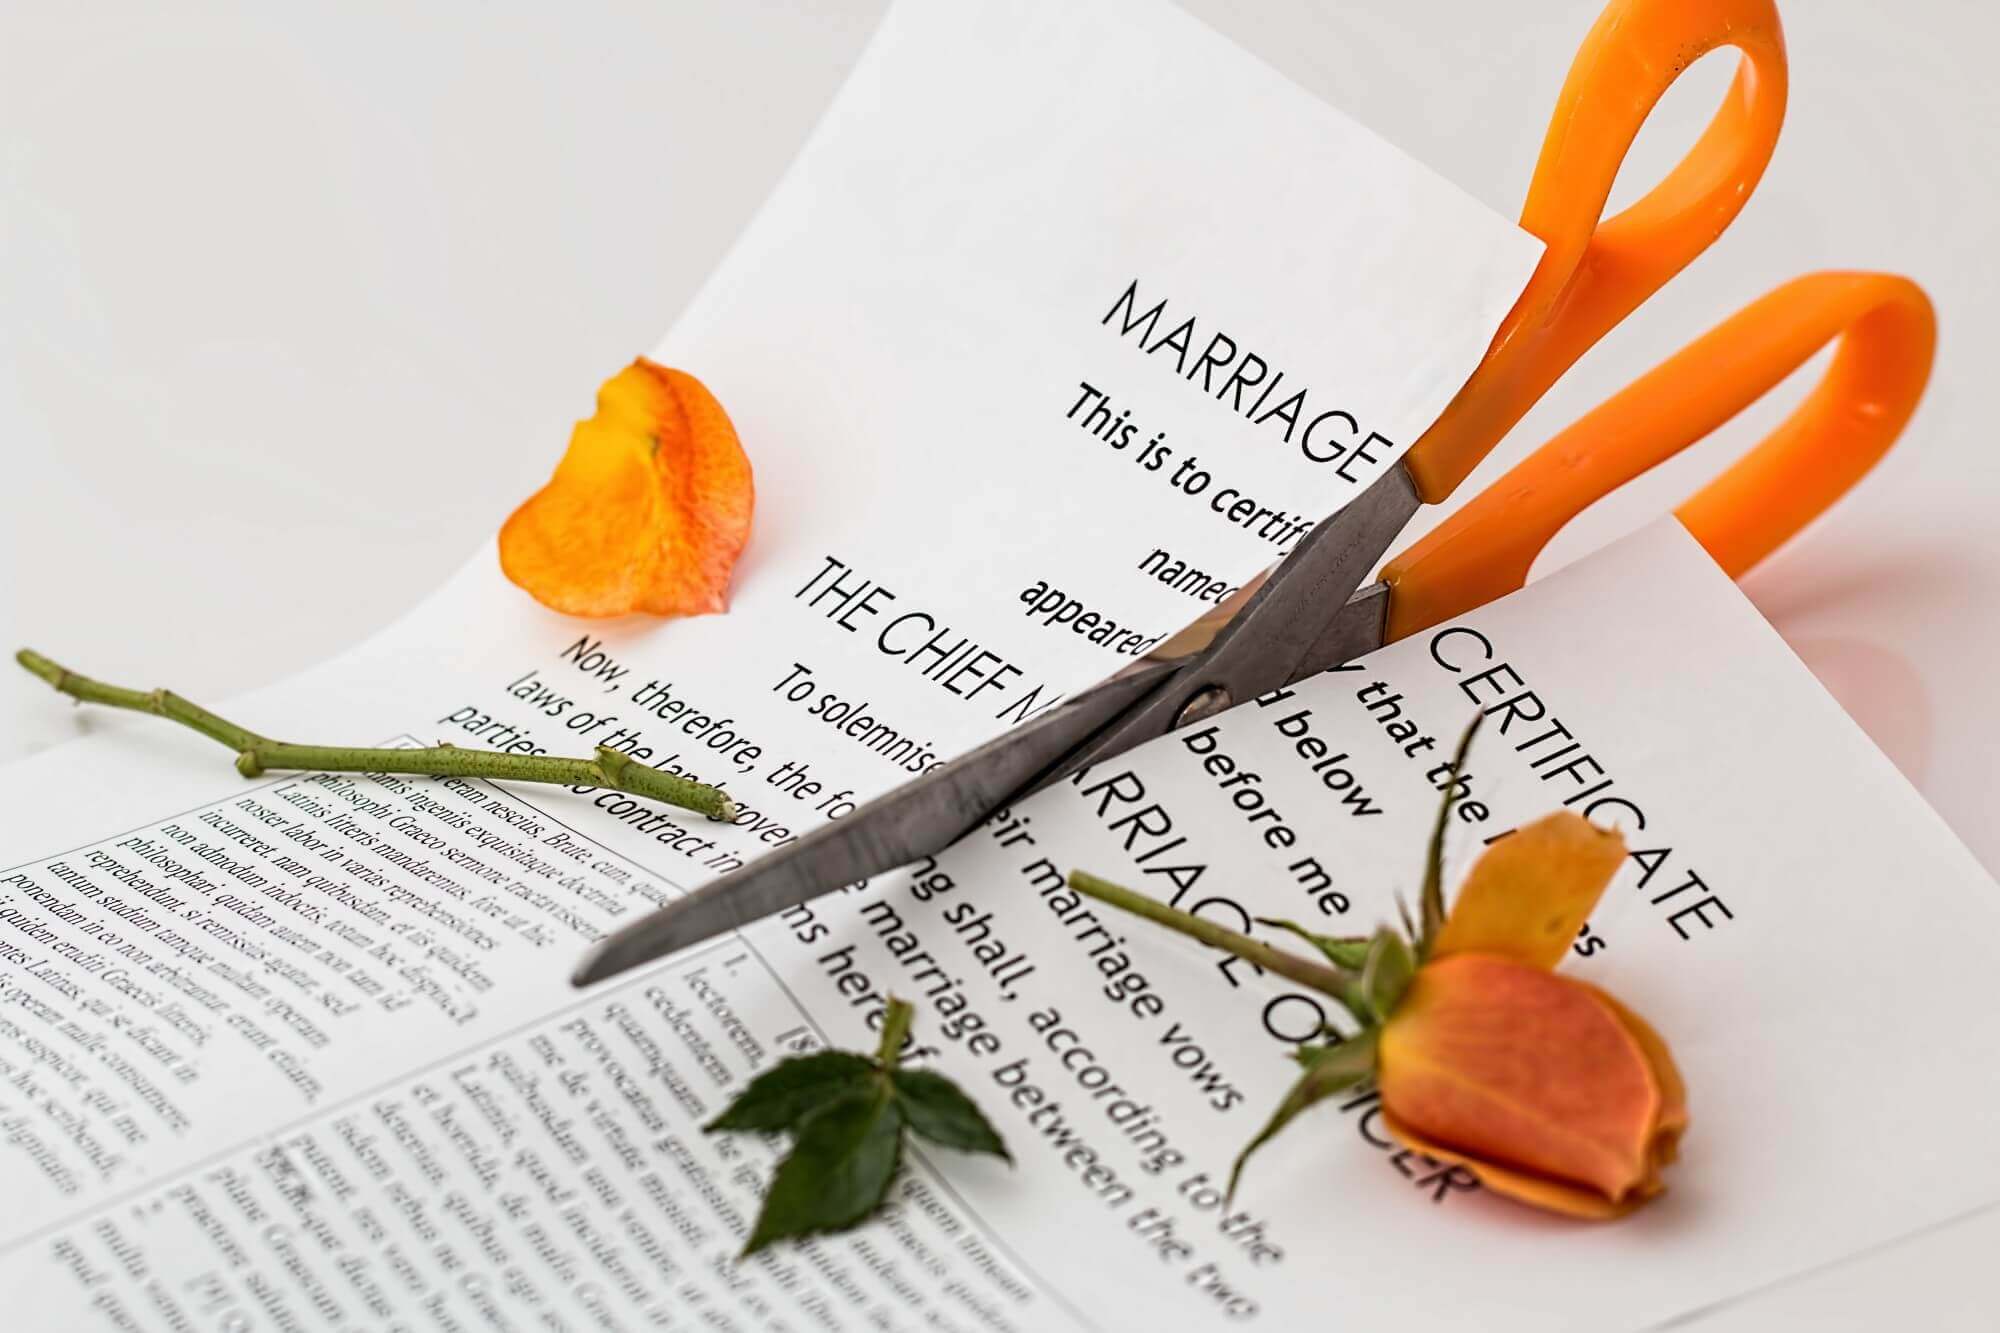 Marriage papers being cut by scissors